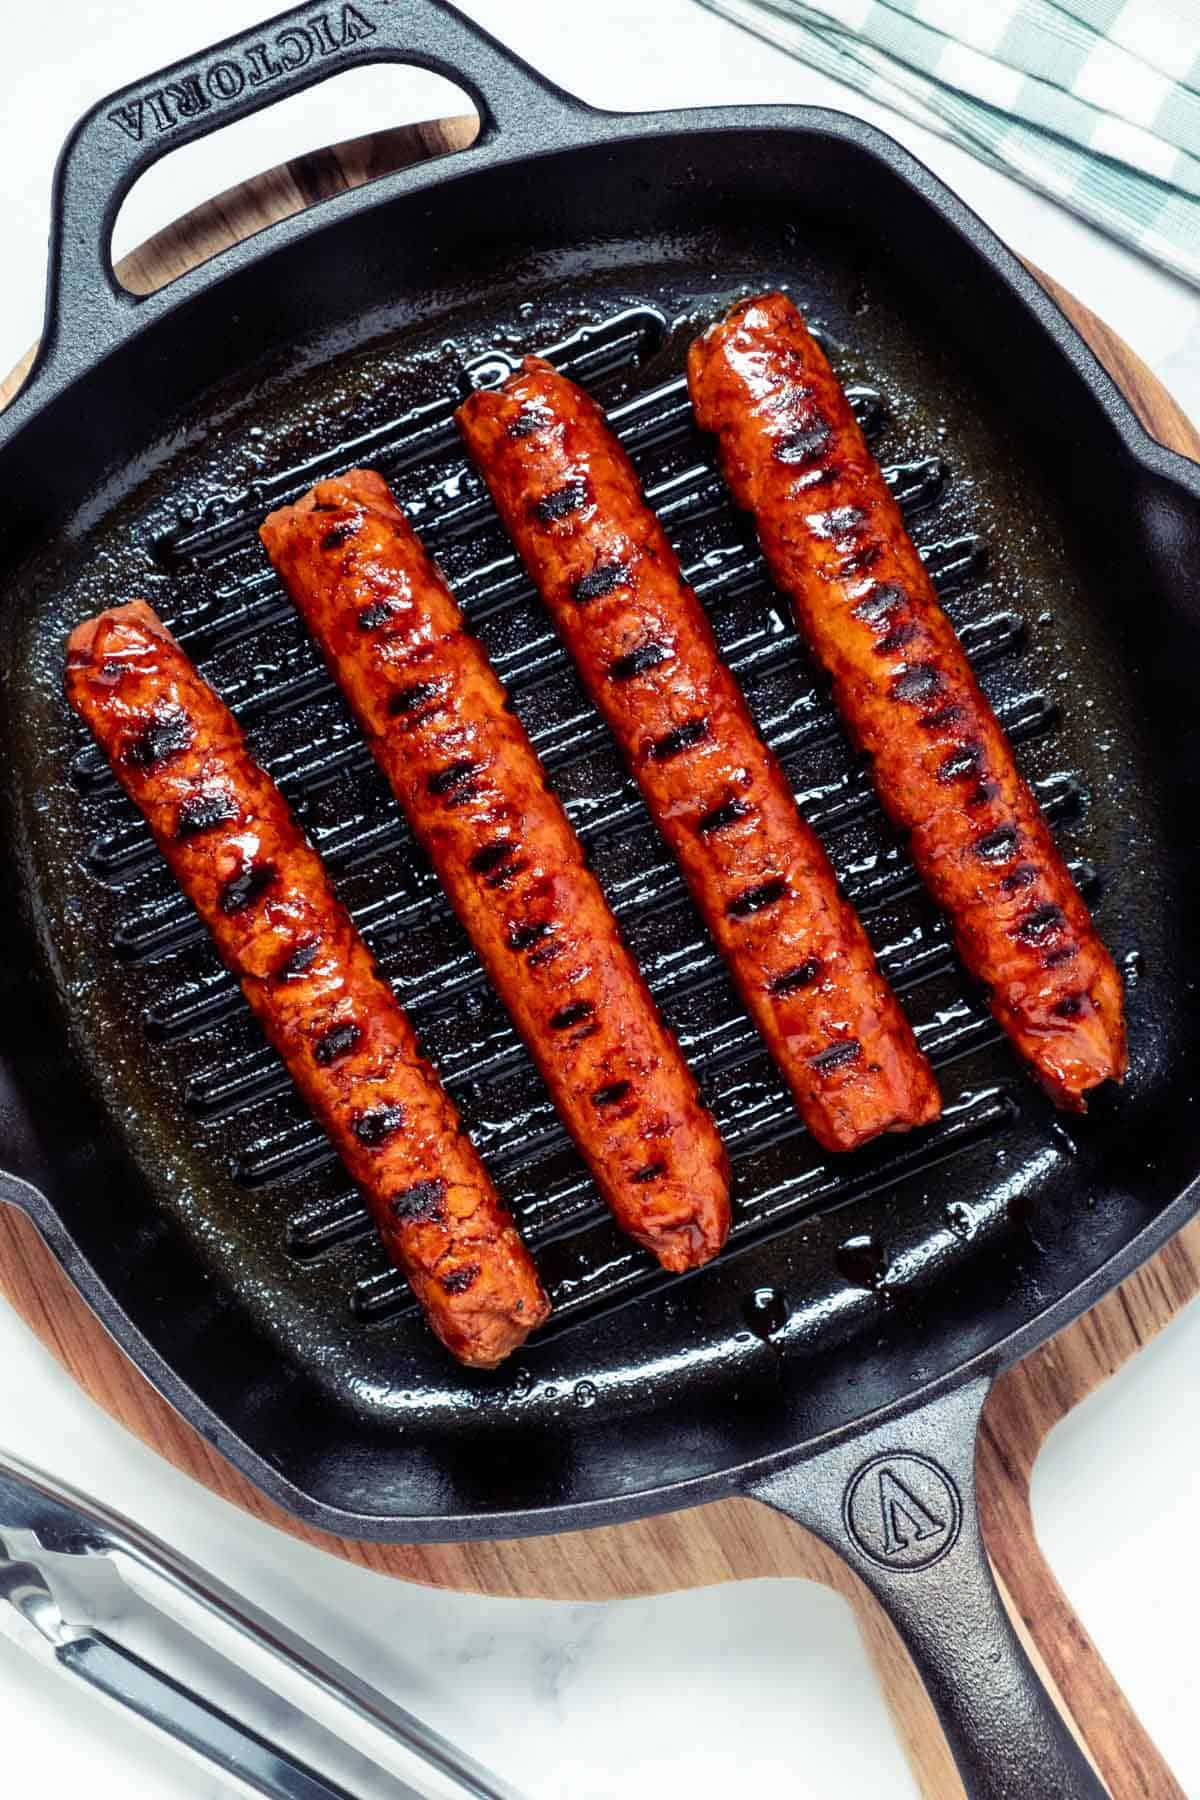 Photo of four vegan sausages in a grill pan.